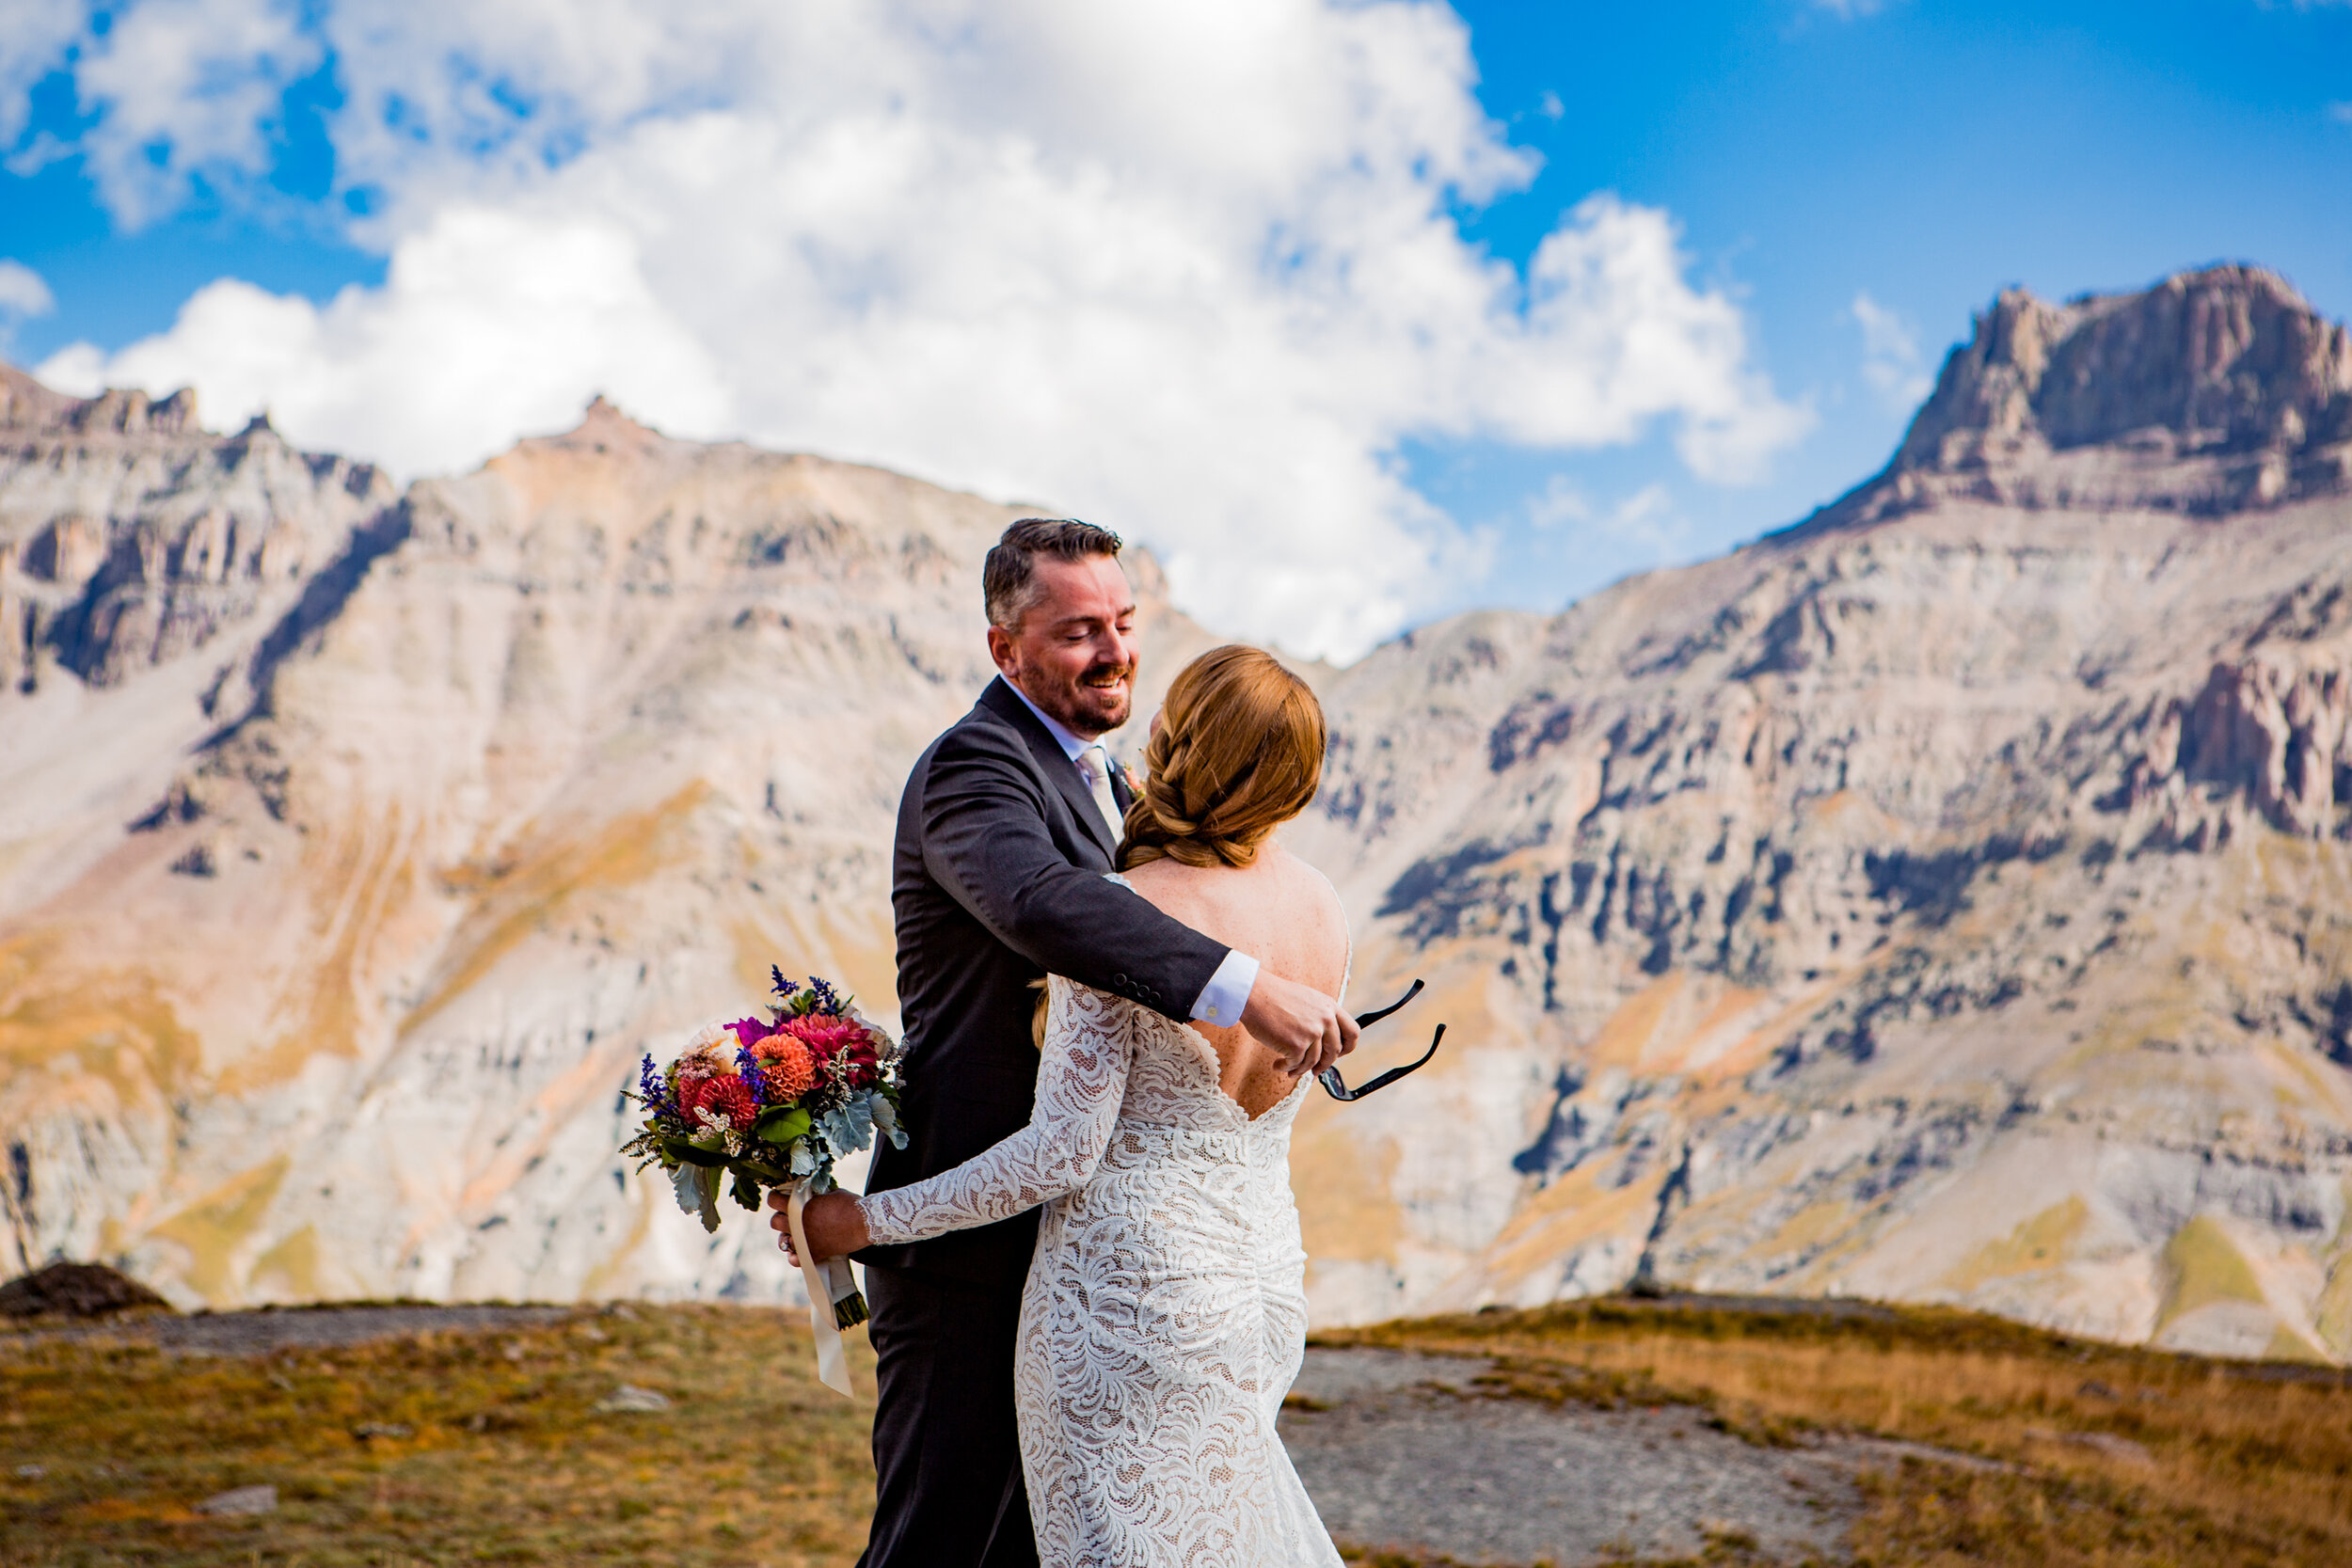  ©Alexi Hubbell Photography 2021  Governor Basin  Jeep wedding  First look 